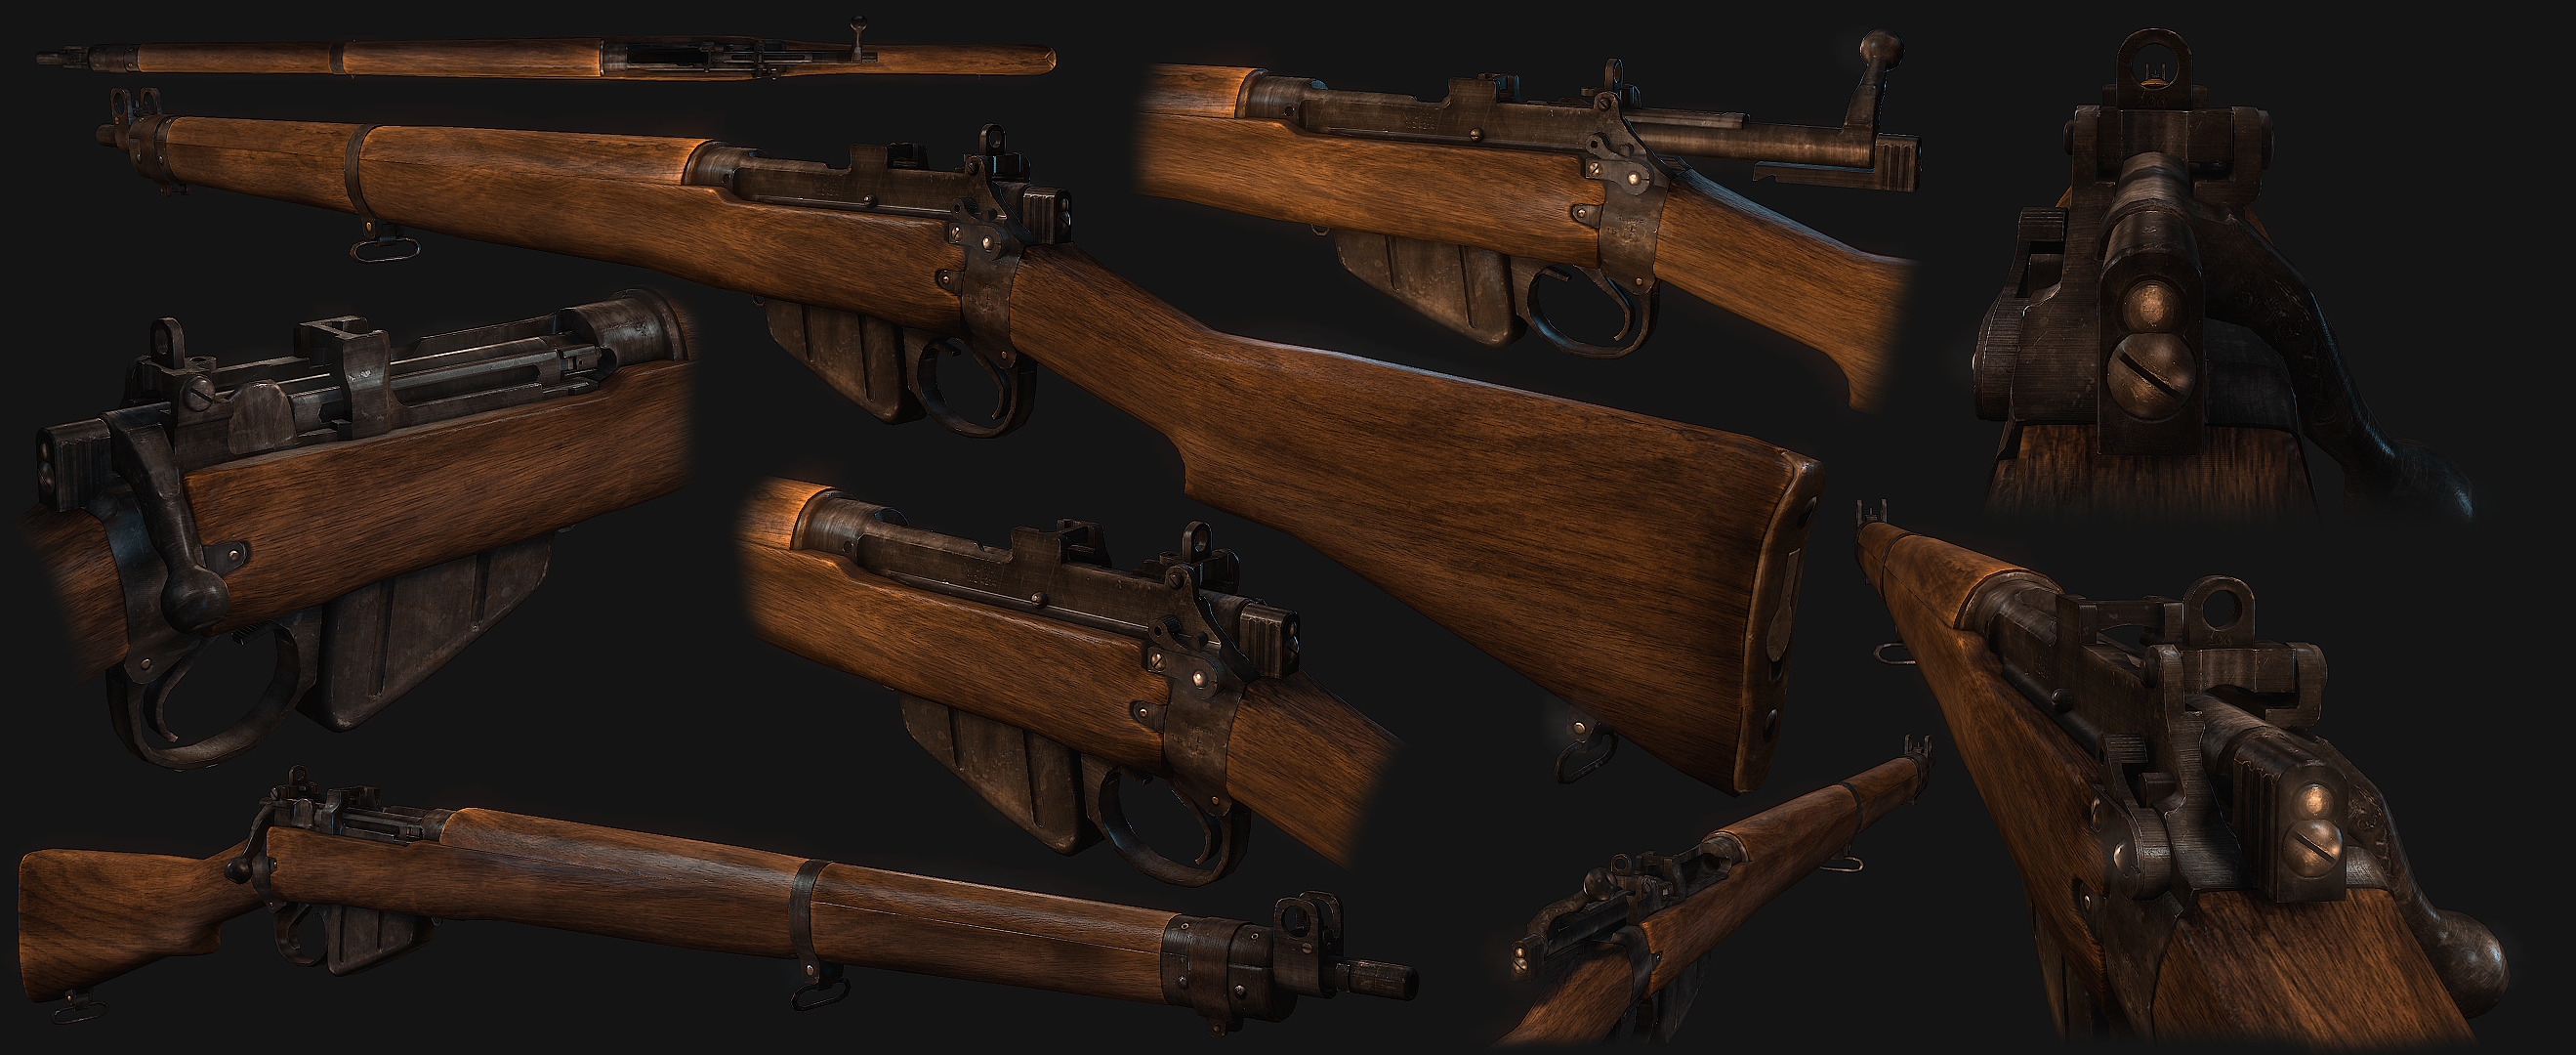 Lee Enfield No4 MK1 by Volcol on DeviantArt